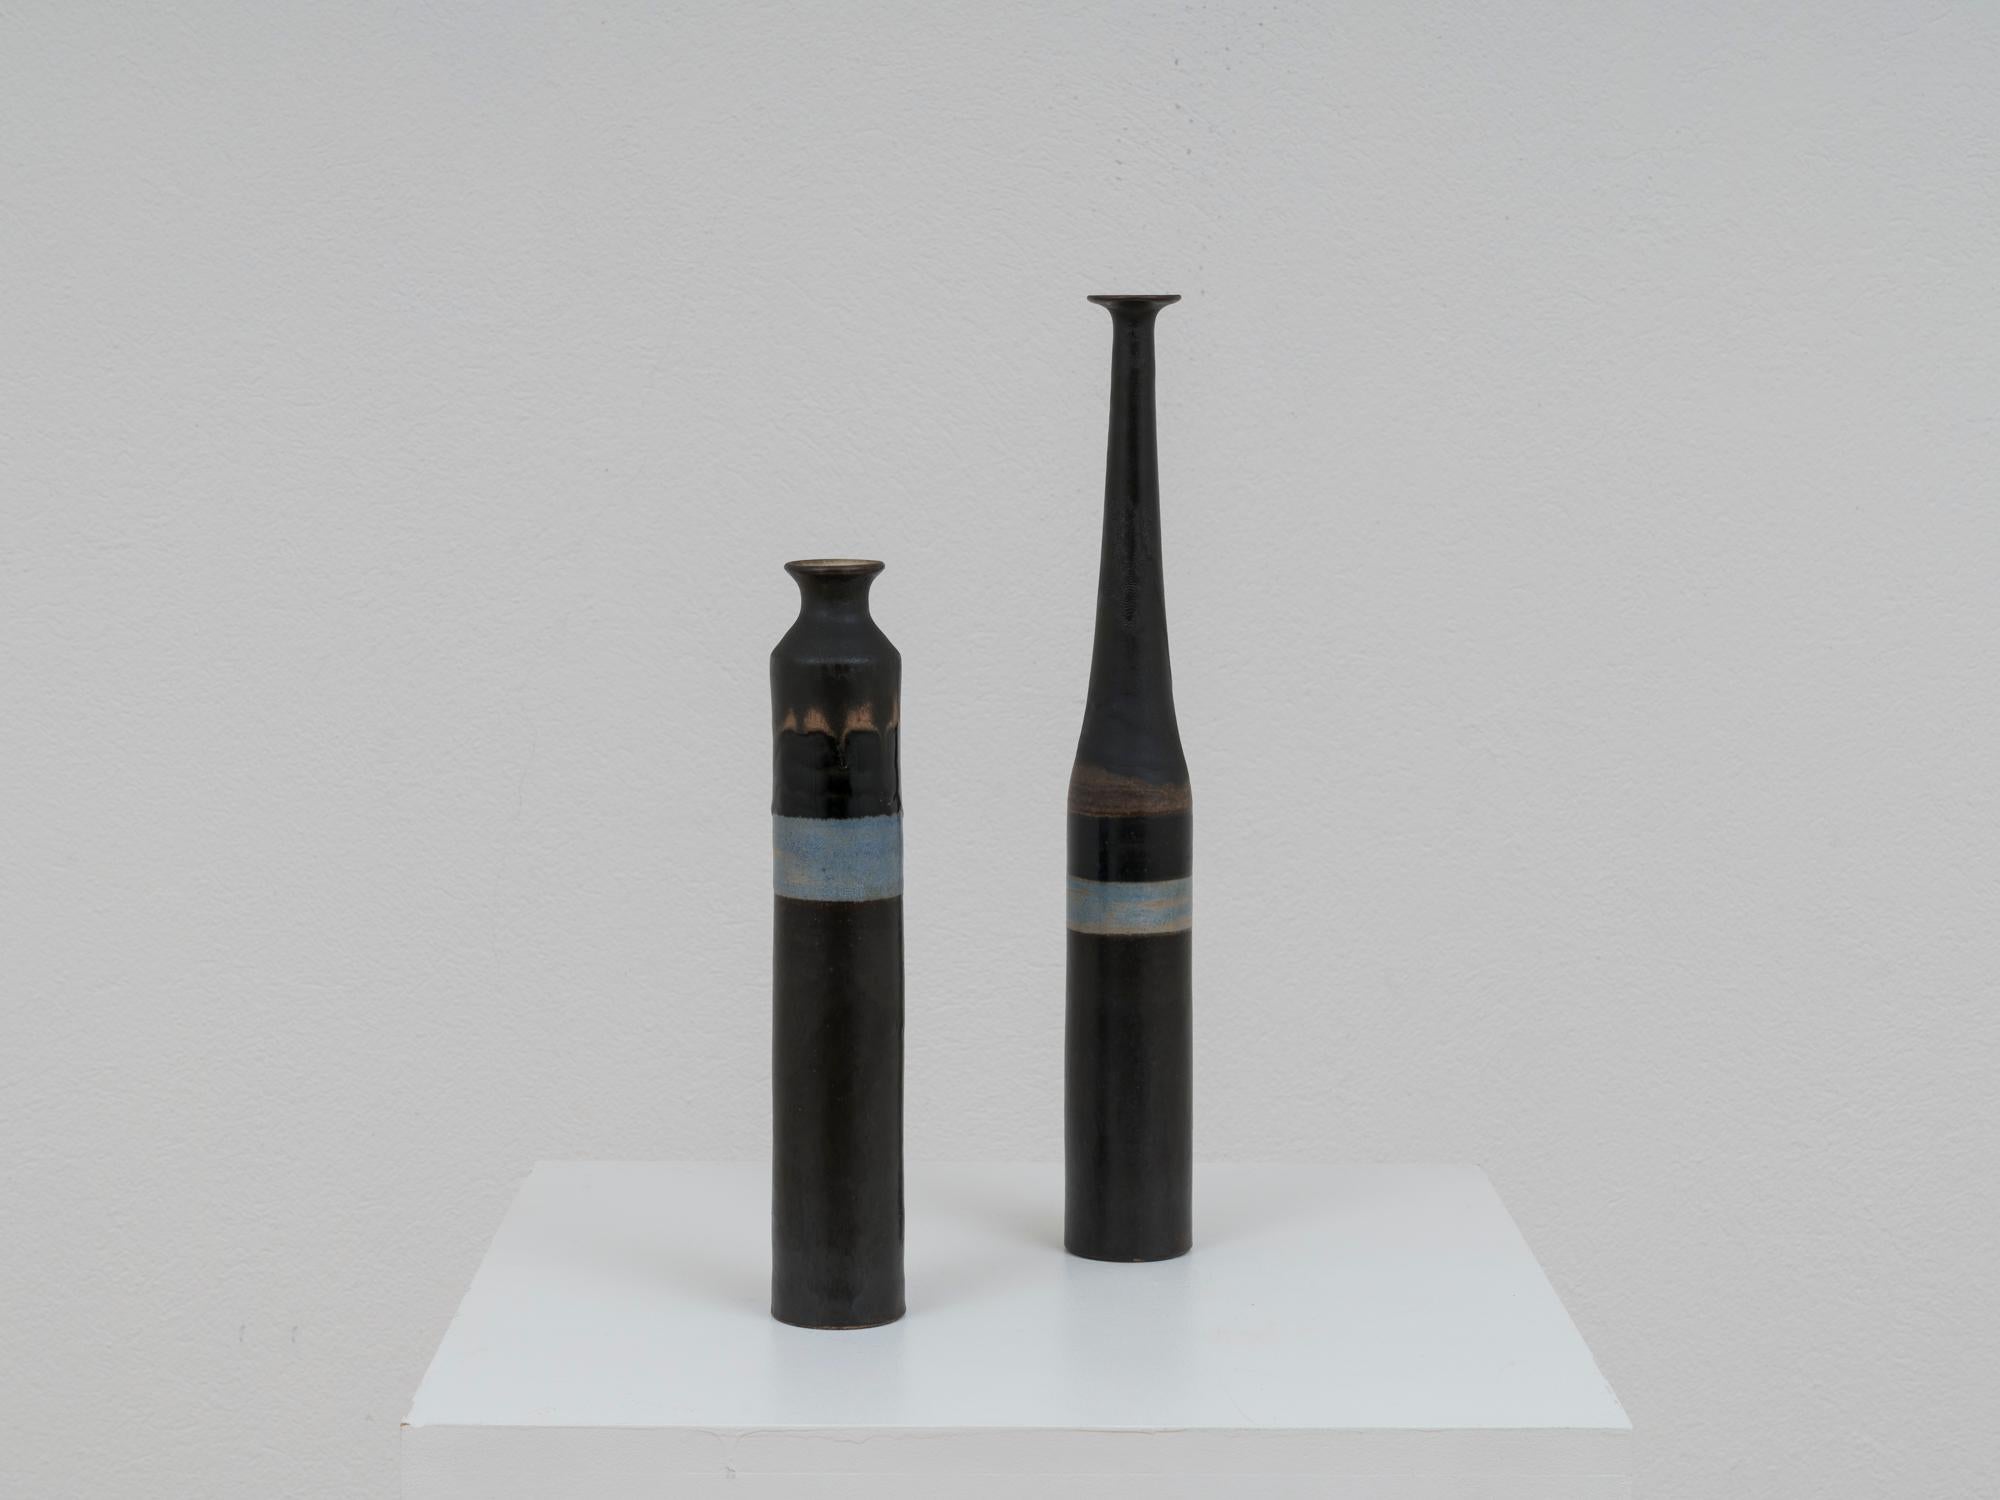 This beautiful ceramic bottles are a work of Italian master ceramicist Bruno Gambone, crafted in the 1970s. They feature a rare black decor, matte with glossy details, with details in azure and brown, standing as refined art objects. Both signed